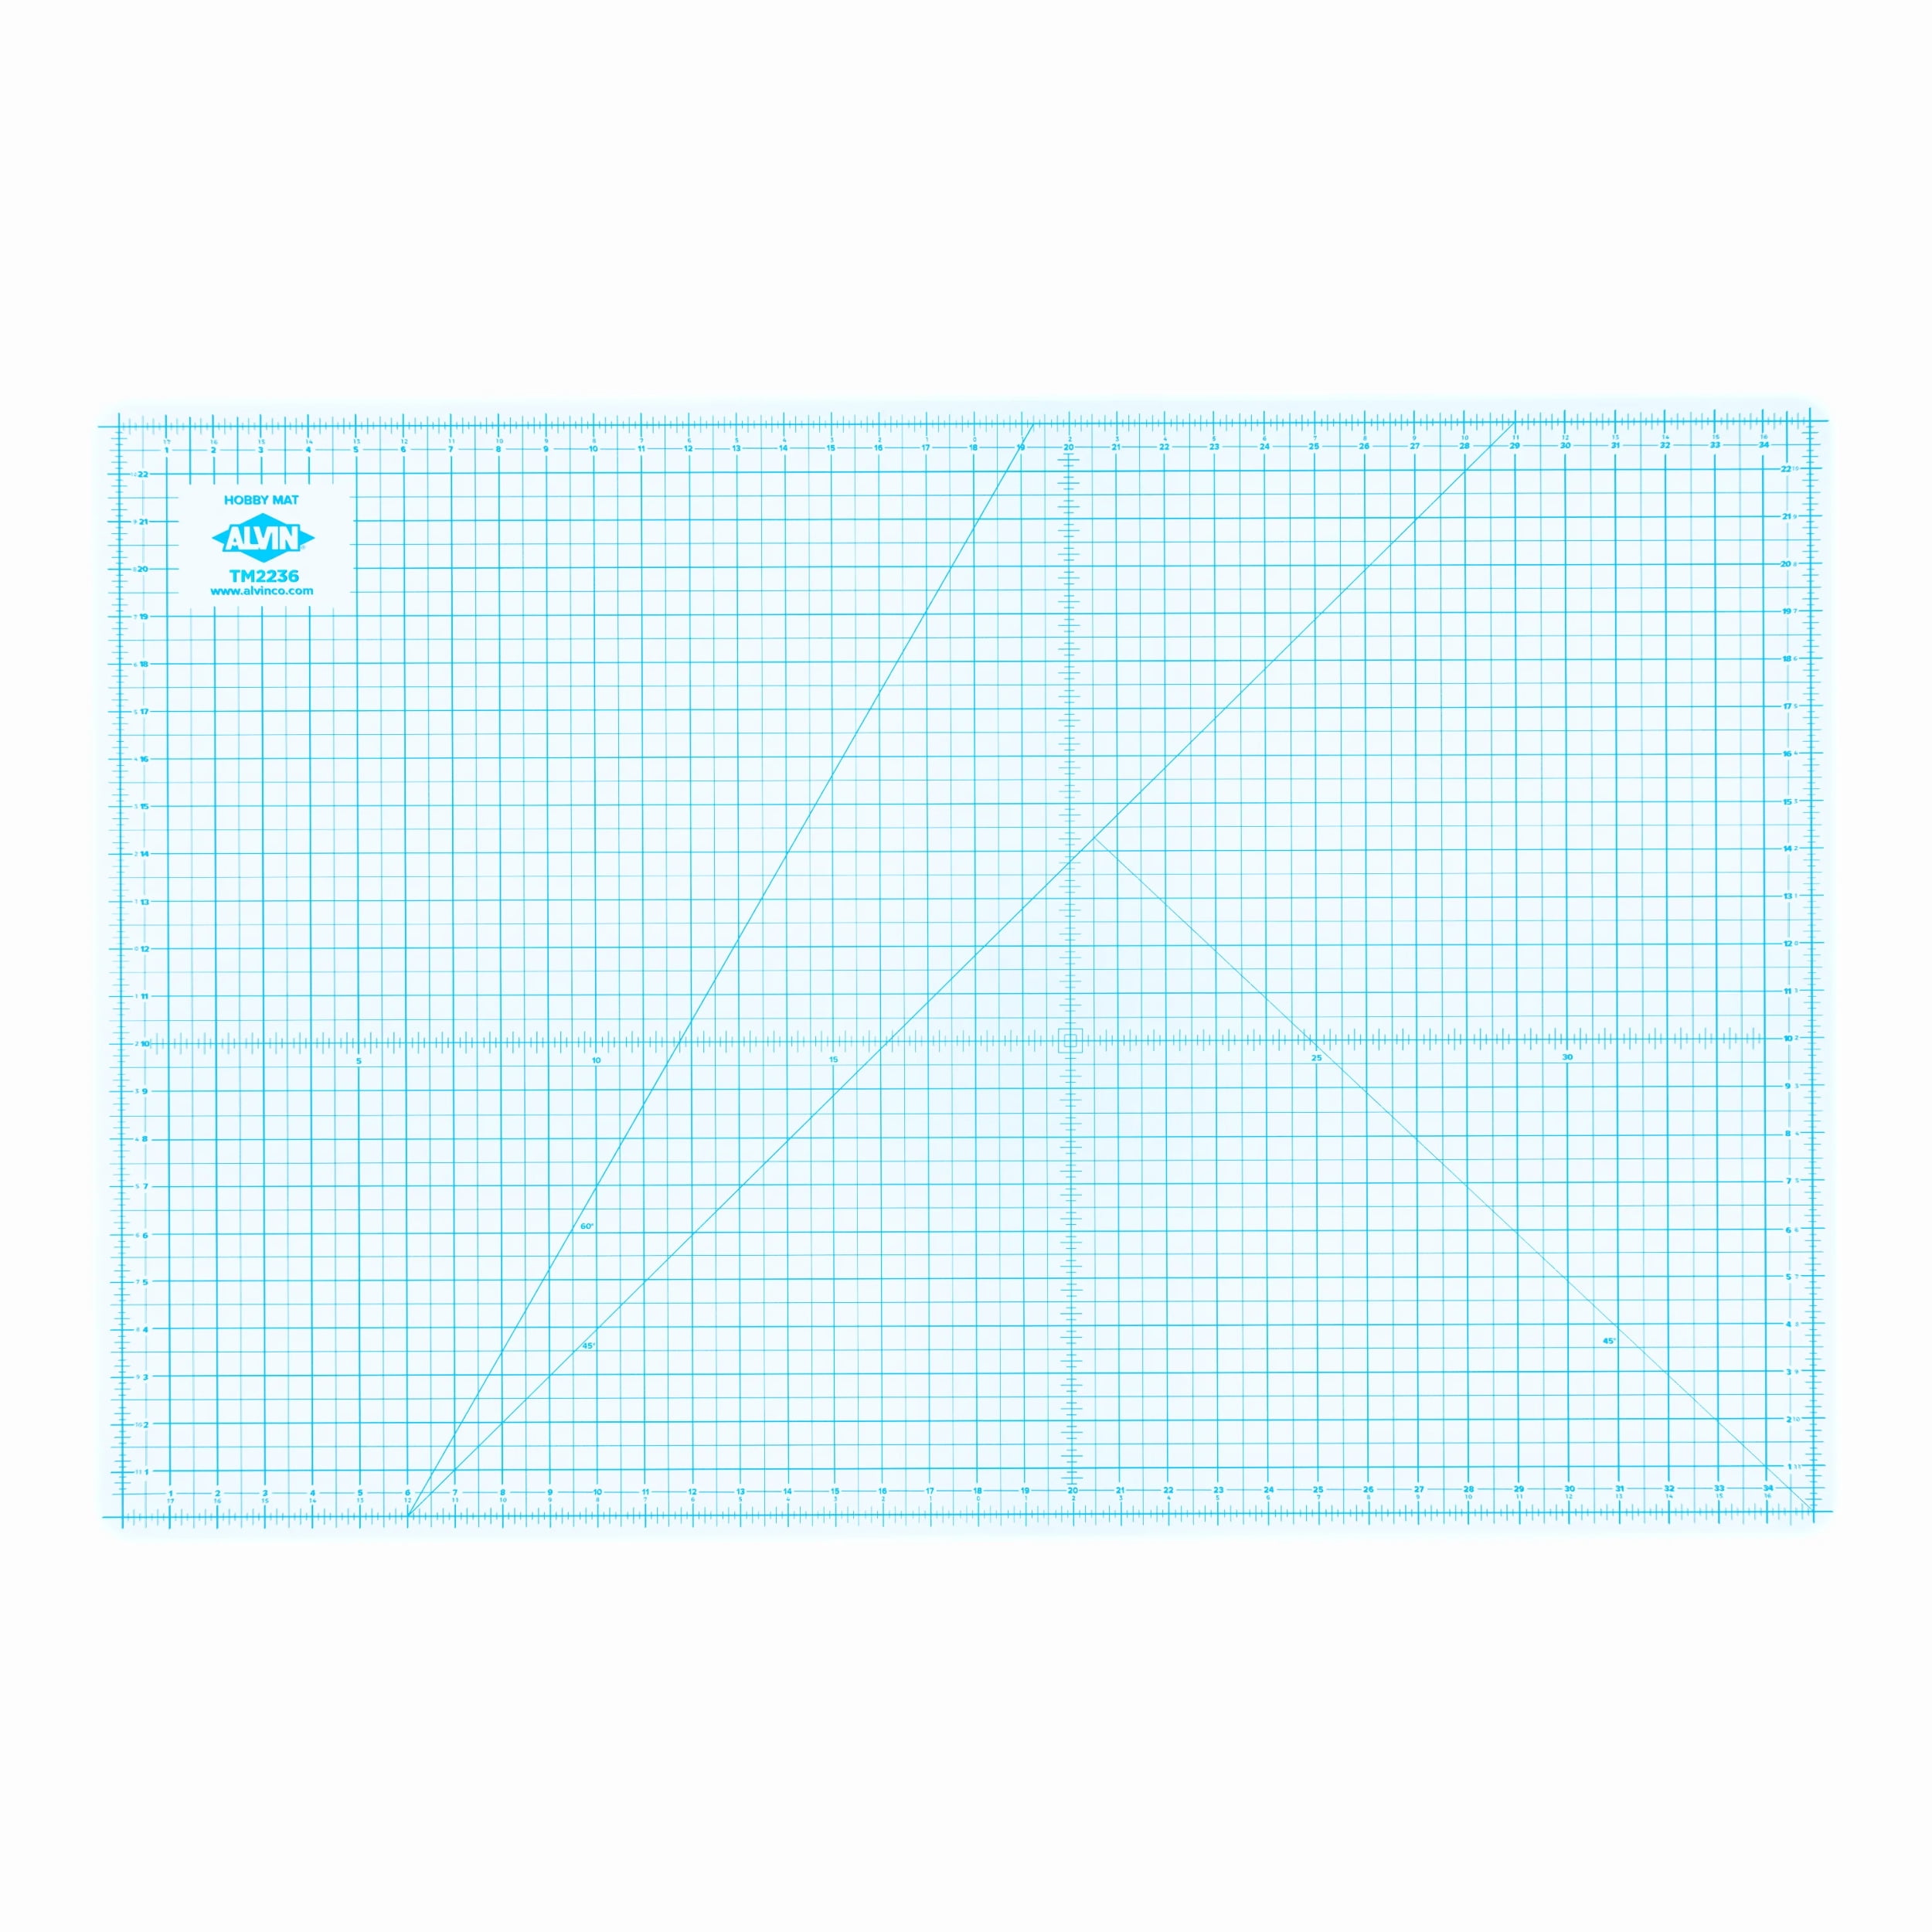 U.S. Art Supply 18 x 24 White/Blue Professional Self Healing 5-6 Layer Double Sided Durable Non-Slip Cutting Mat Great for